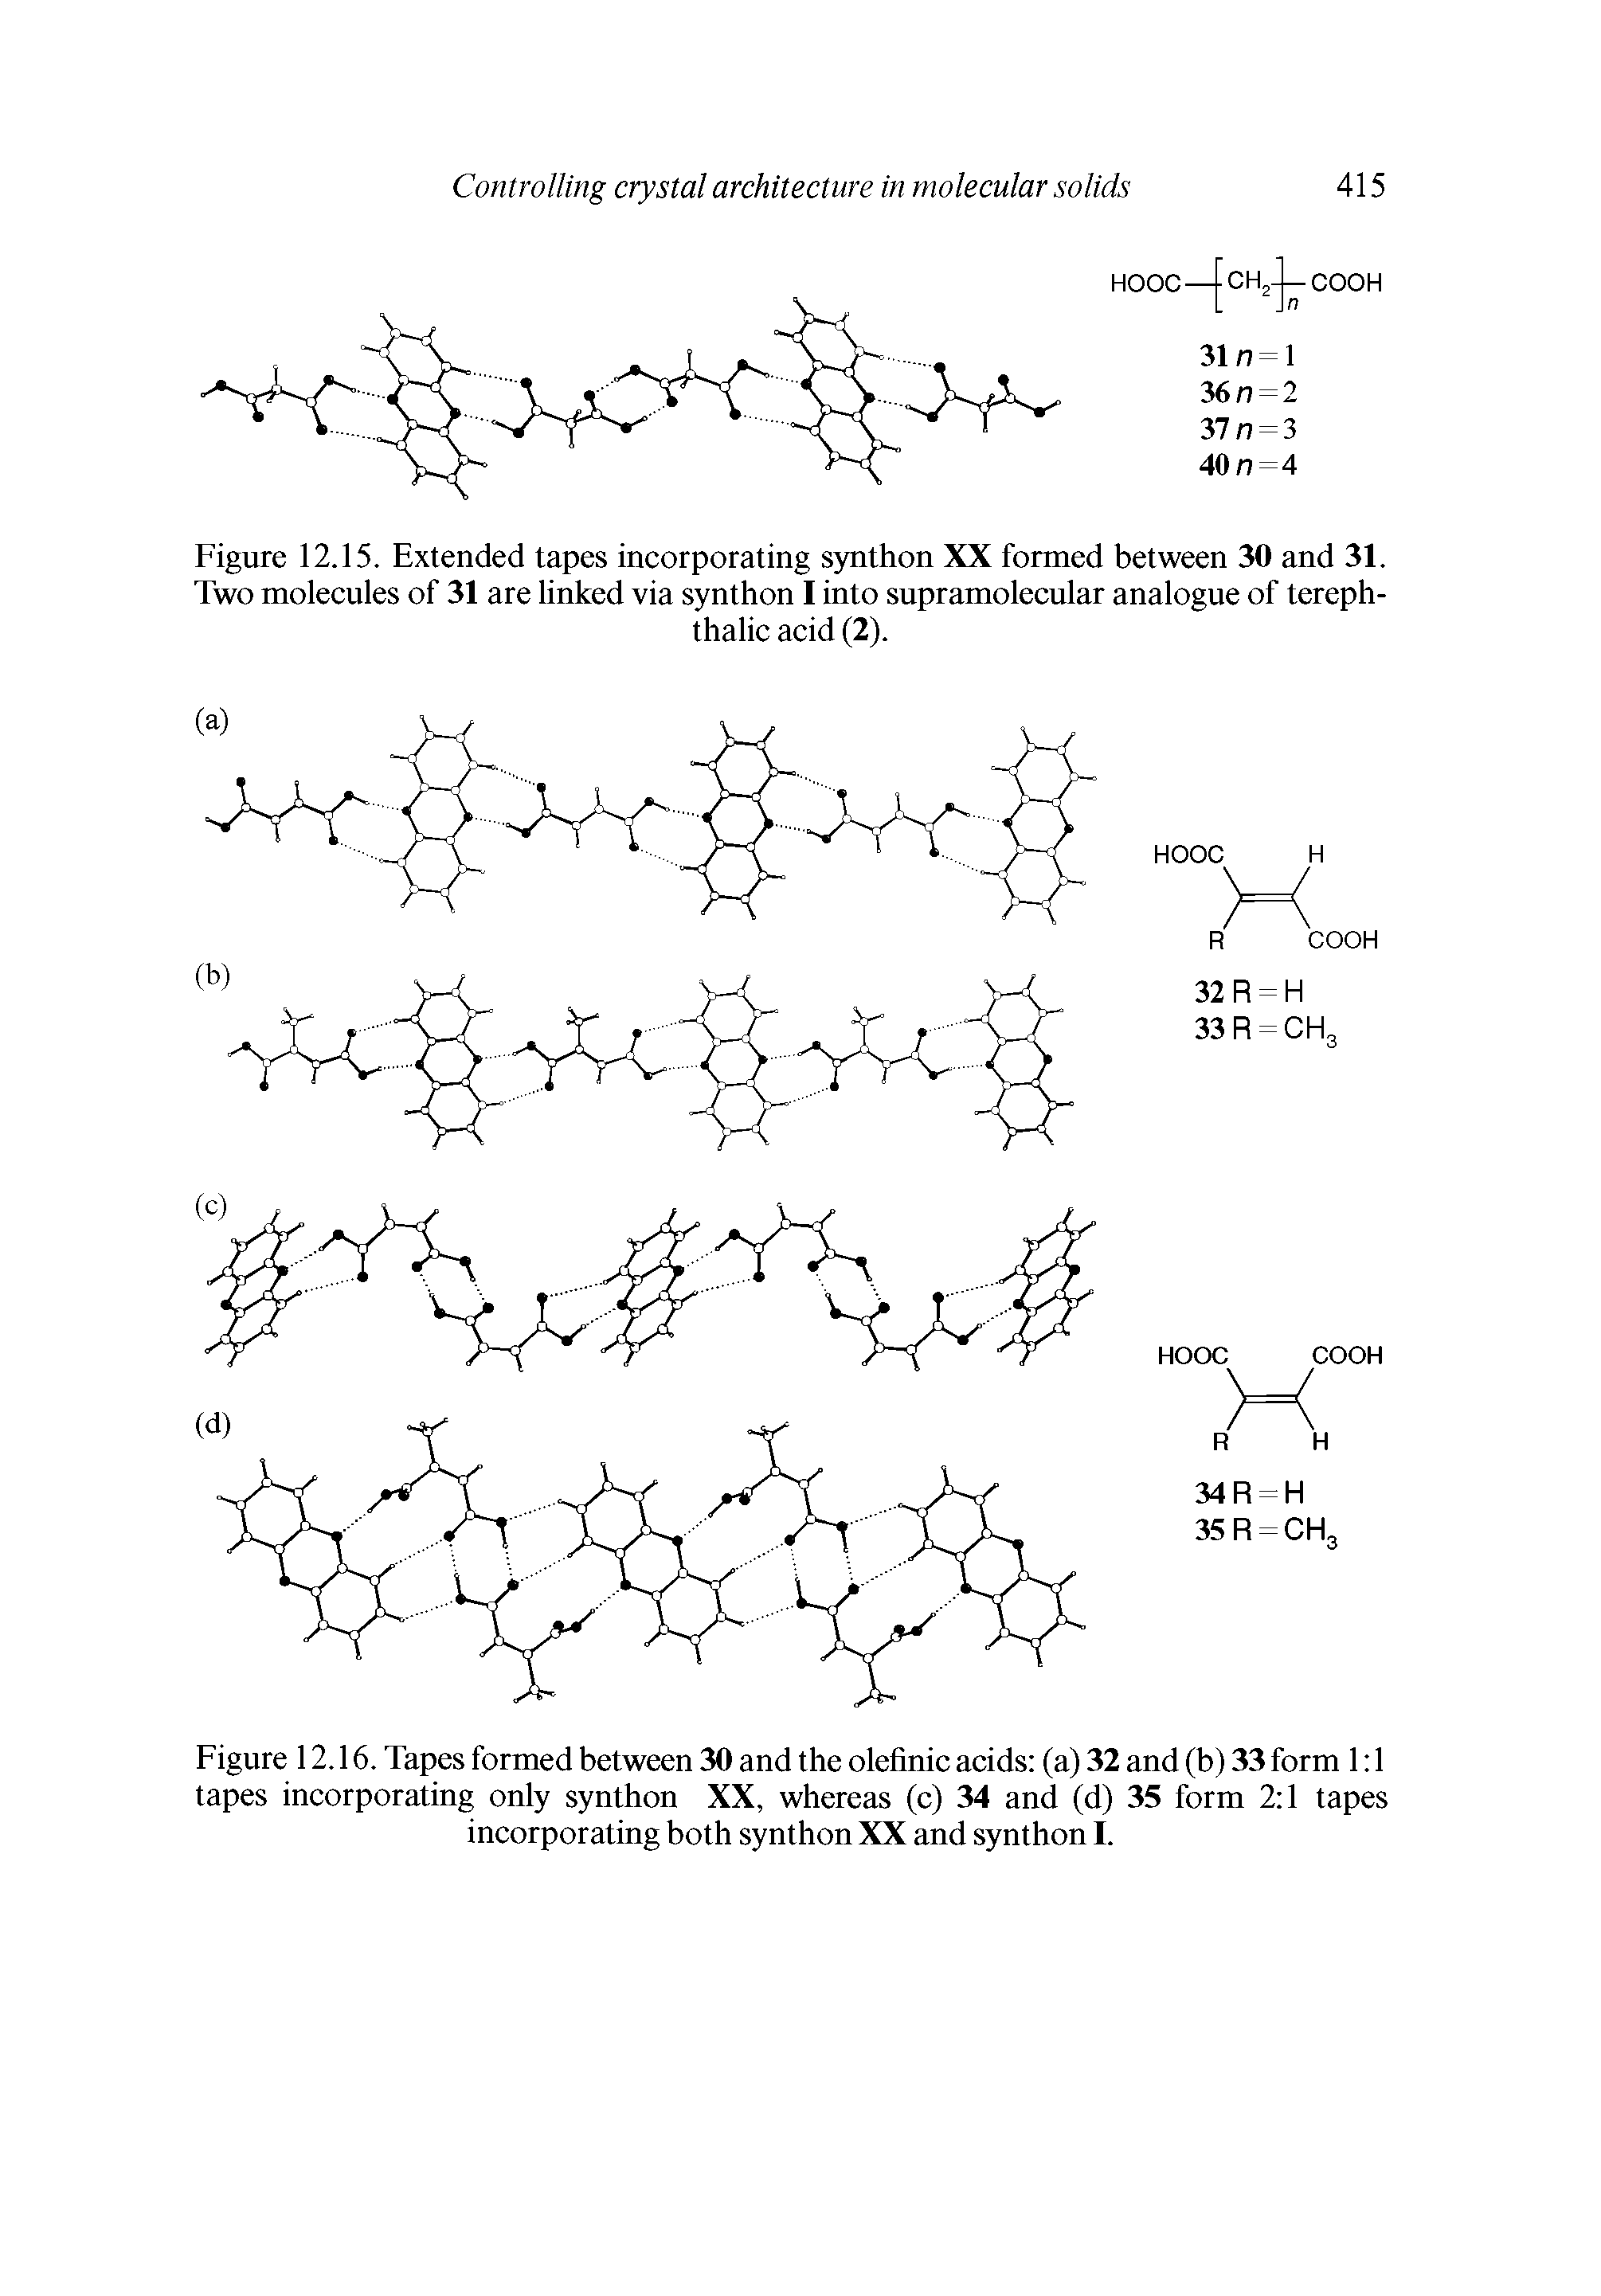 Figure 12.16. Tapes formed between 30 and the olefinic acids (a) 32 and (b) 33 form 1 1 tapes incorporating only synthon XX, whereas (c) 34 and (d) 35 form 2 1 tapes incorporating both synthon XX and synthon I.